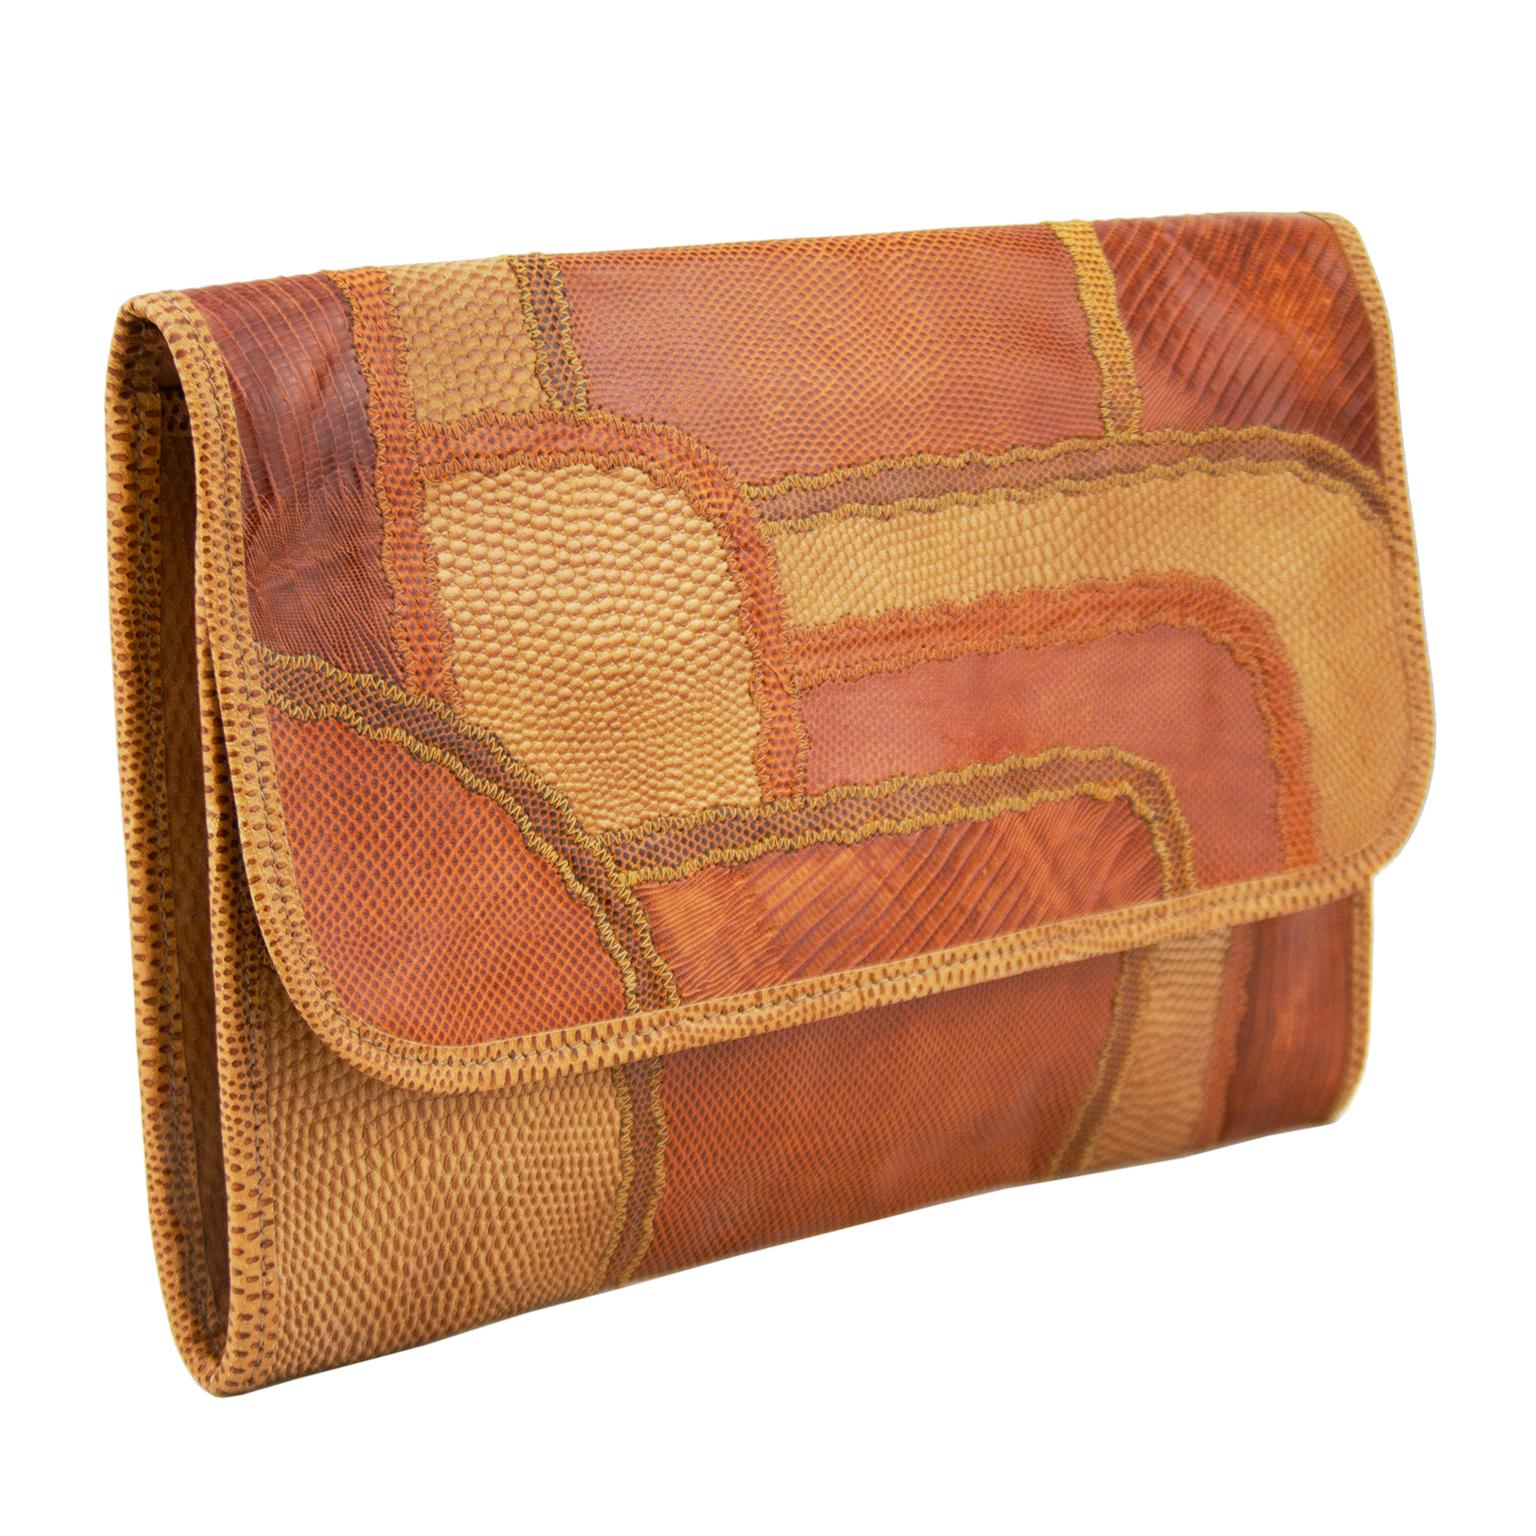 1980s Carlos Falchi tan and brown patchwork rectangular clutch. Envelope style with flap front with gold snap closure. Brown leather interior with single interior slip pocket with zipper. Excellent vintage condition. 12